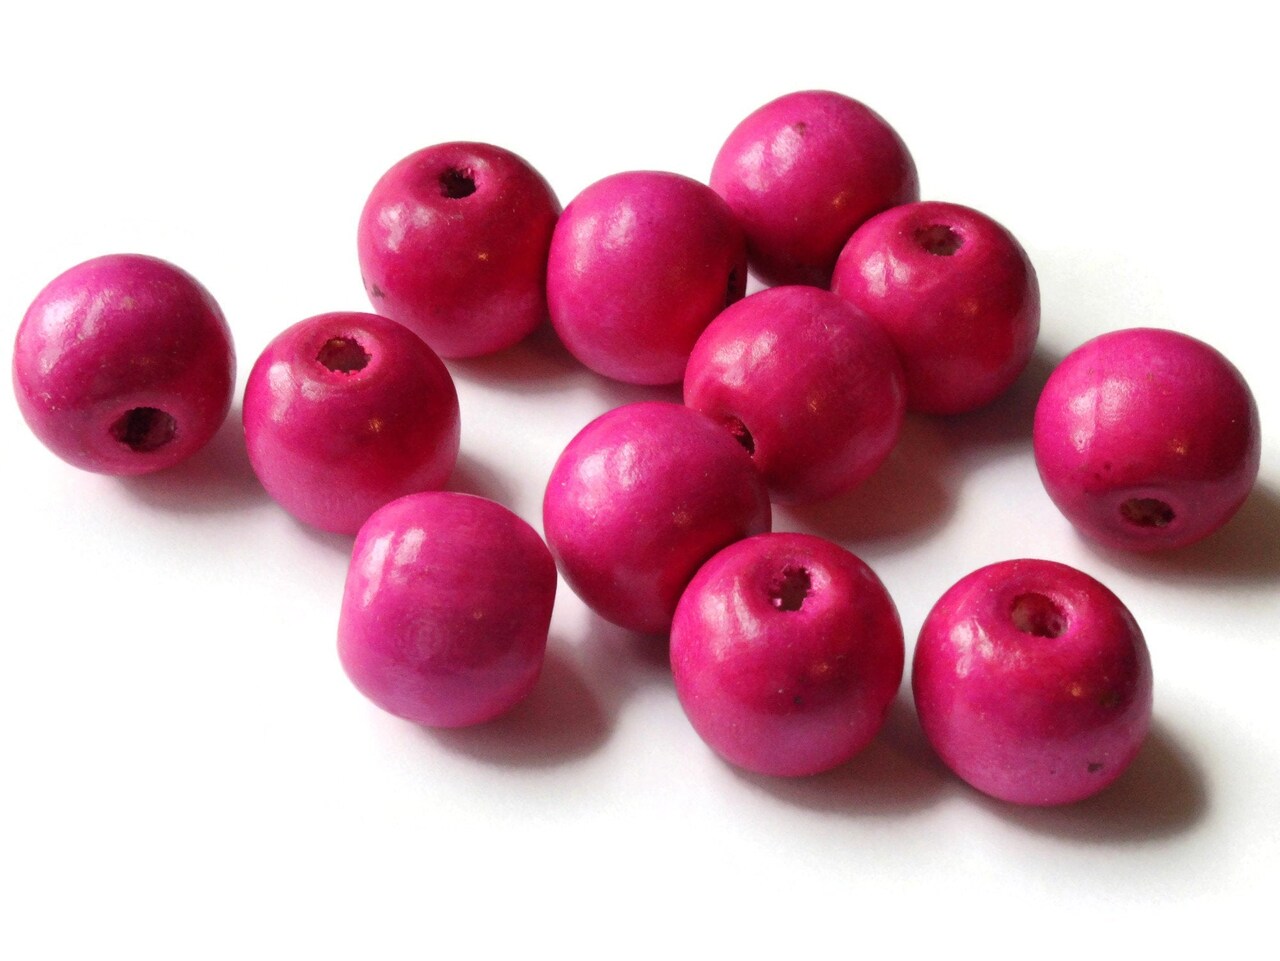 12 19mm x 17mm Round Pink Wood Beads Large Hole Wooden Ball Macrame Beads